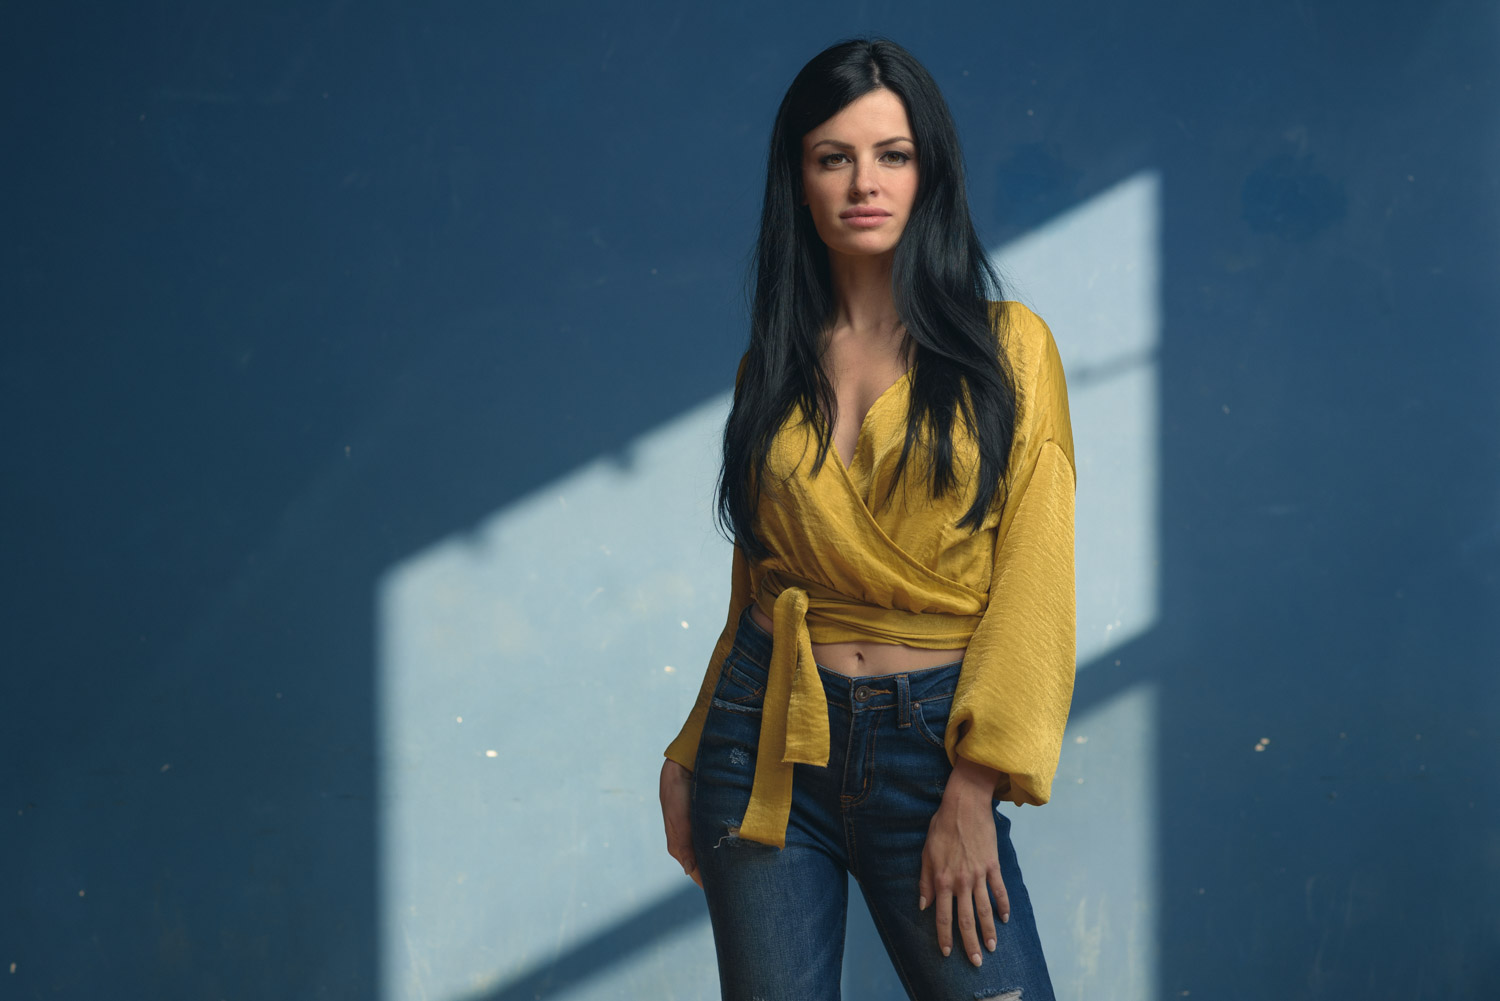 a portrait of Katy wearing a yellow blouse and blue jeans, she is posing in front of a blue wall and the sun is casting a reflection of the window upon the wall behind her.